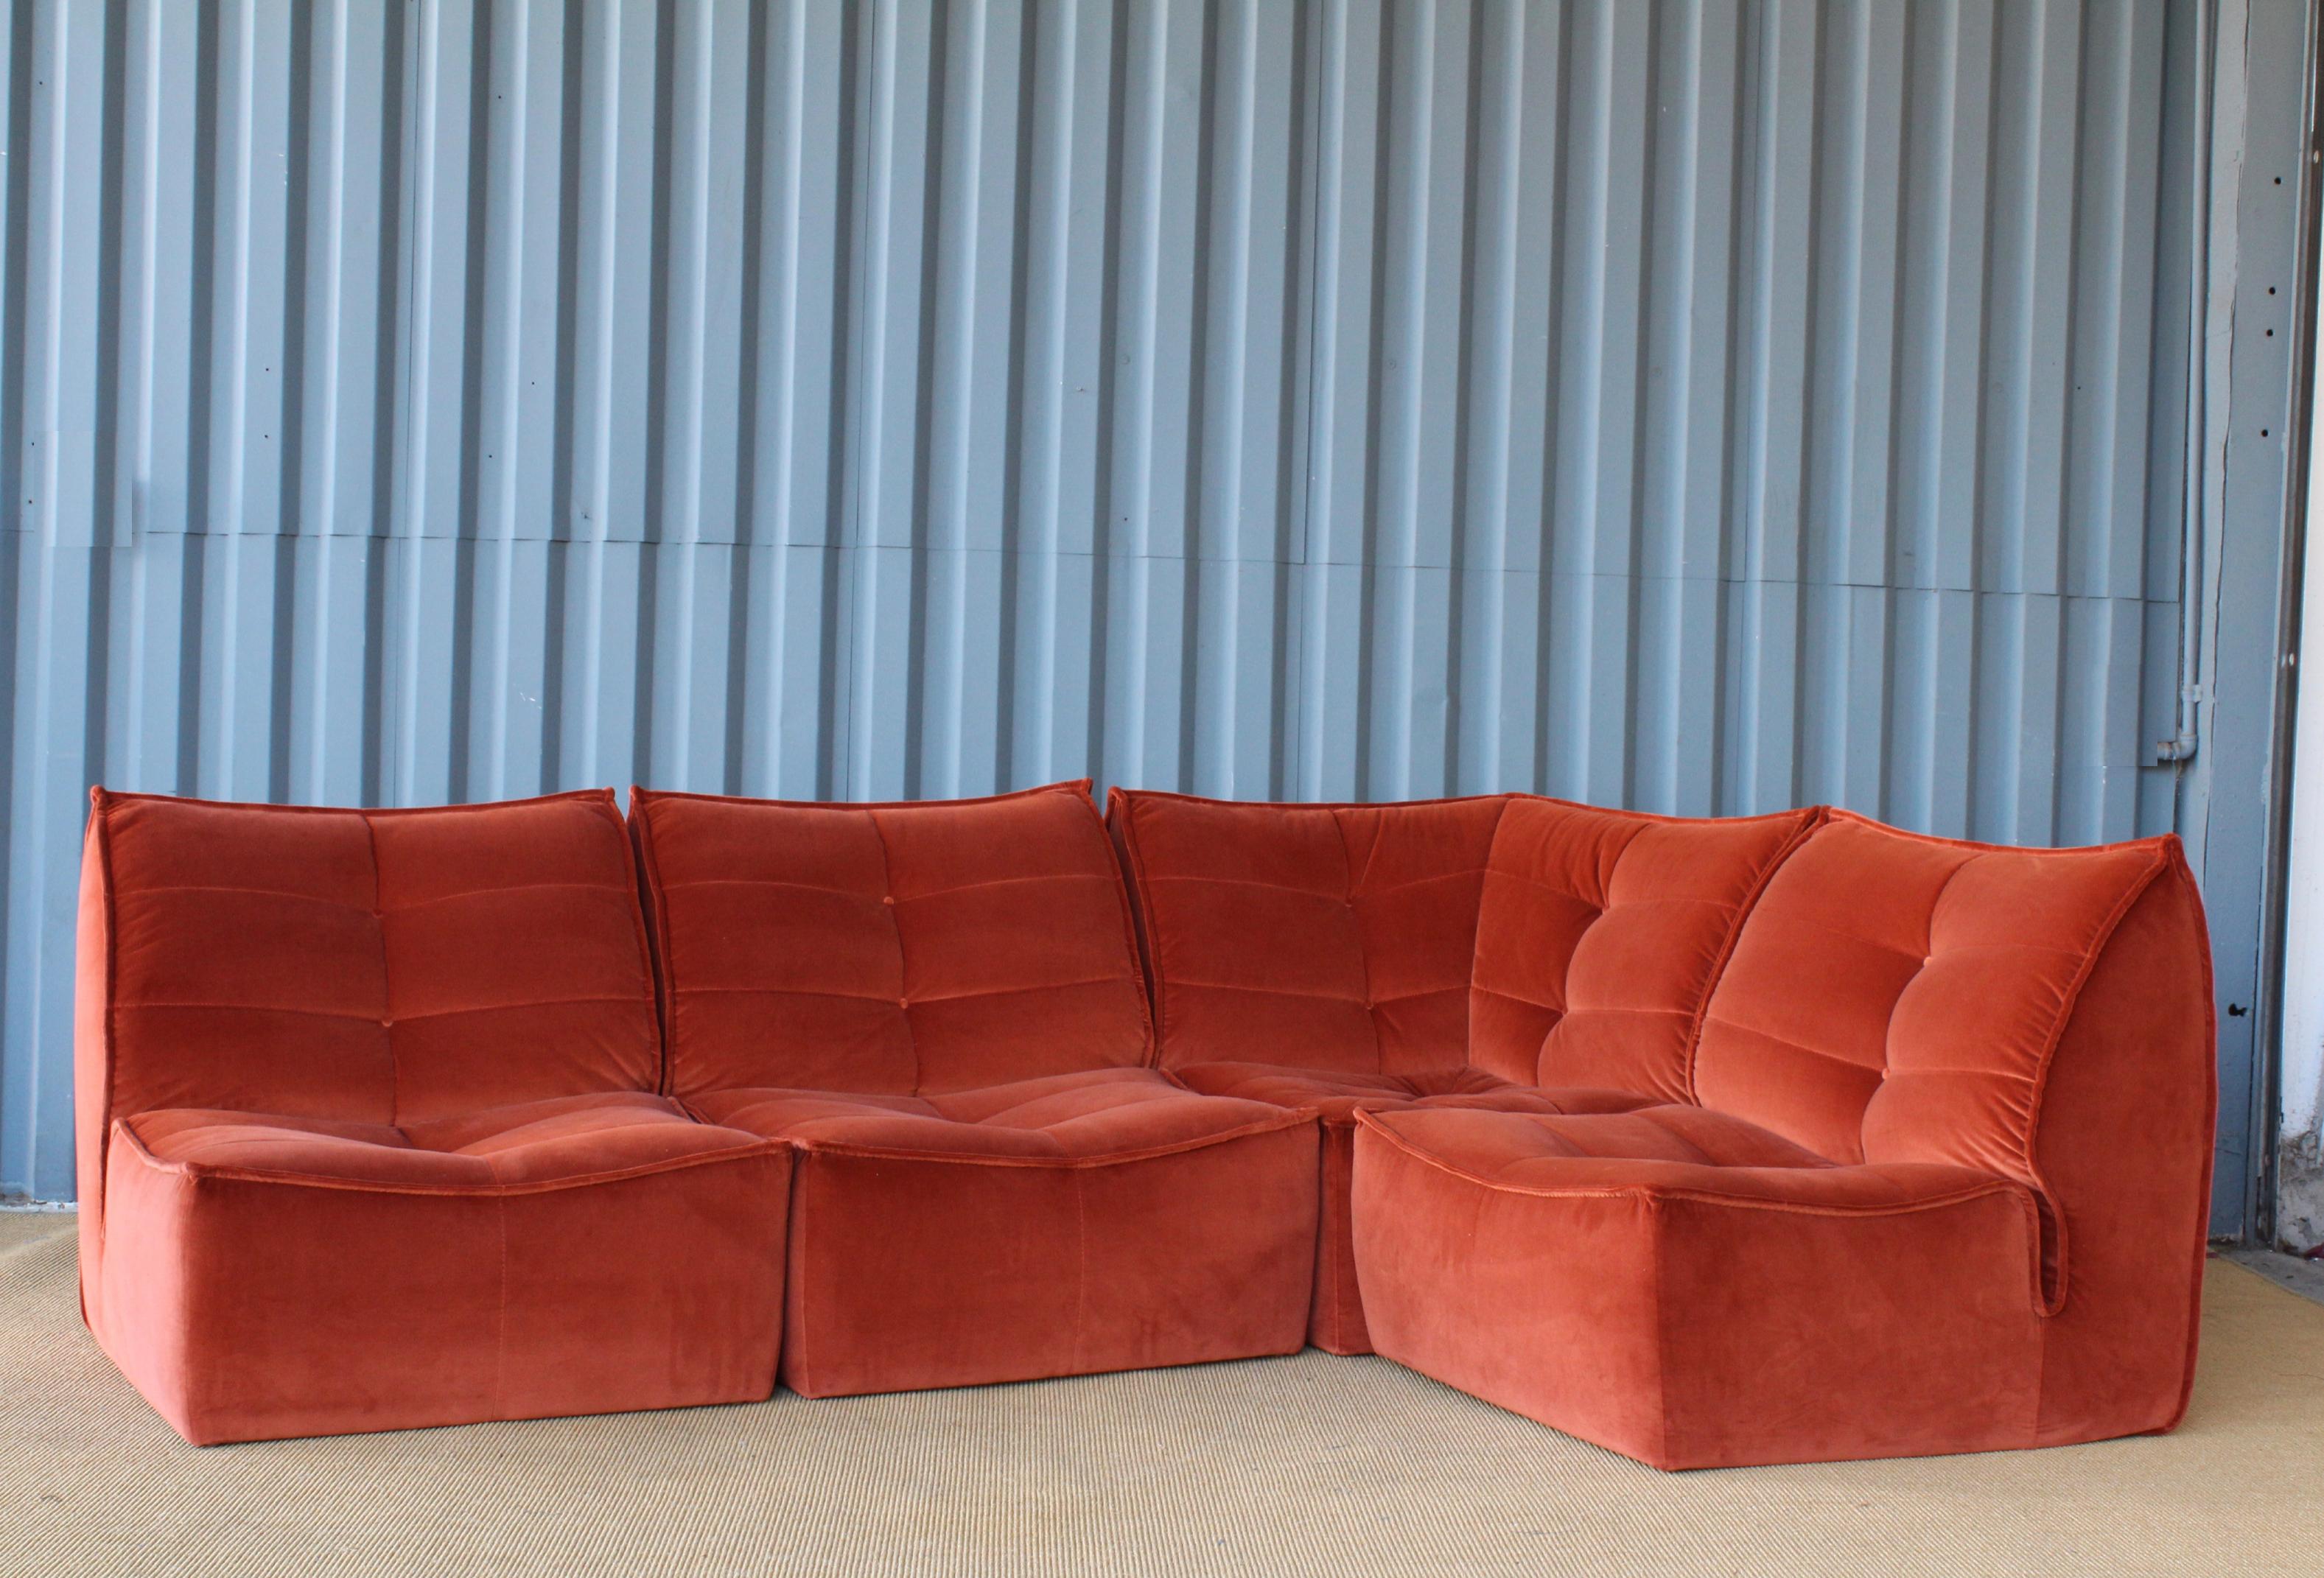 1970s Italian made modular sofa with new burnt orange velvet upholstery. With all four pieces combined this sofa measures 95 inches by 66 inches.